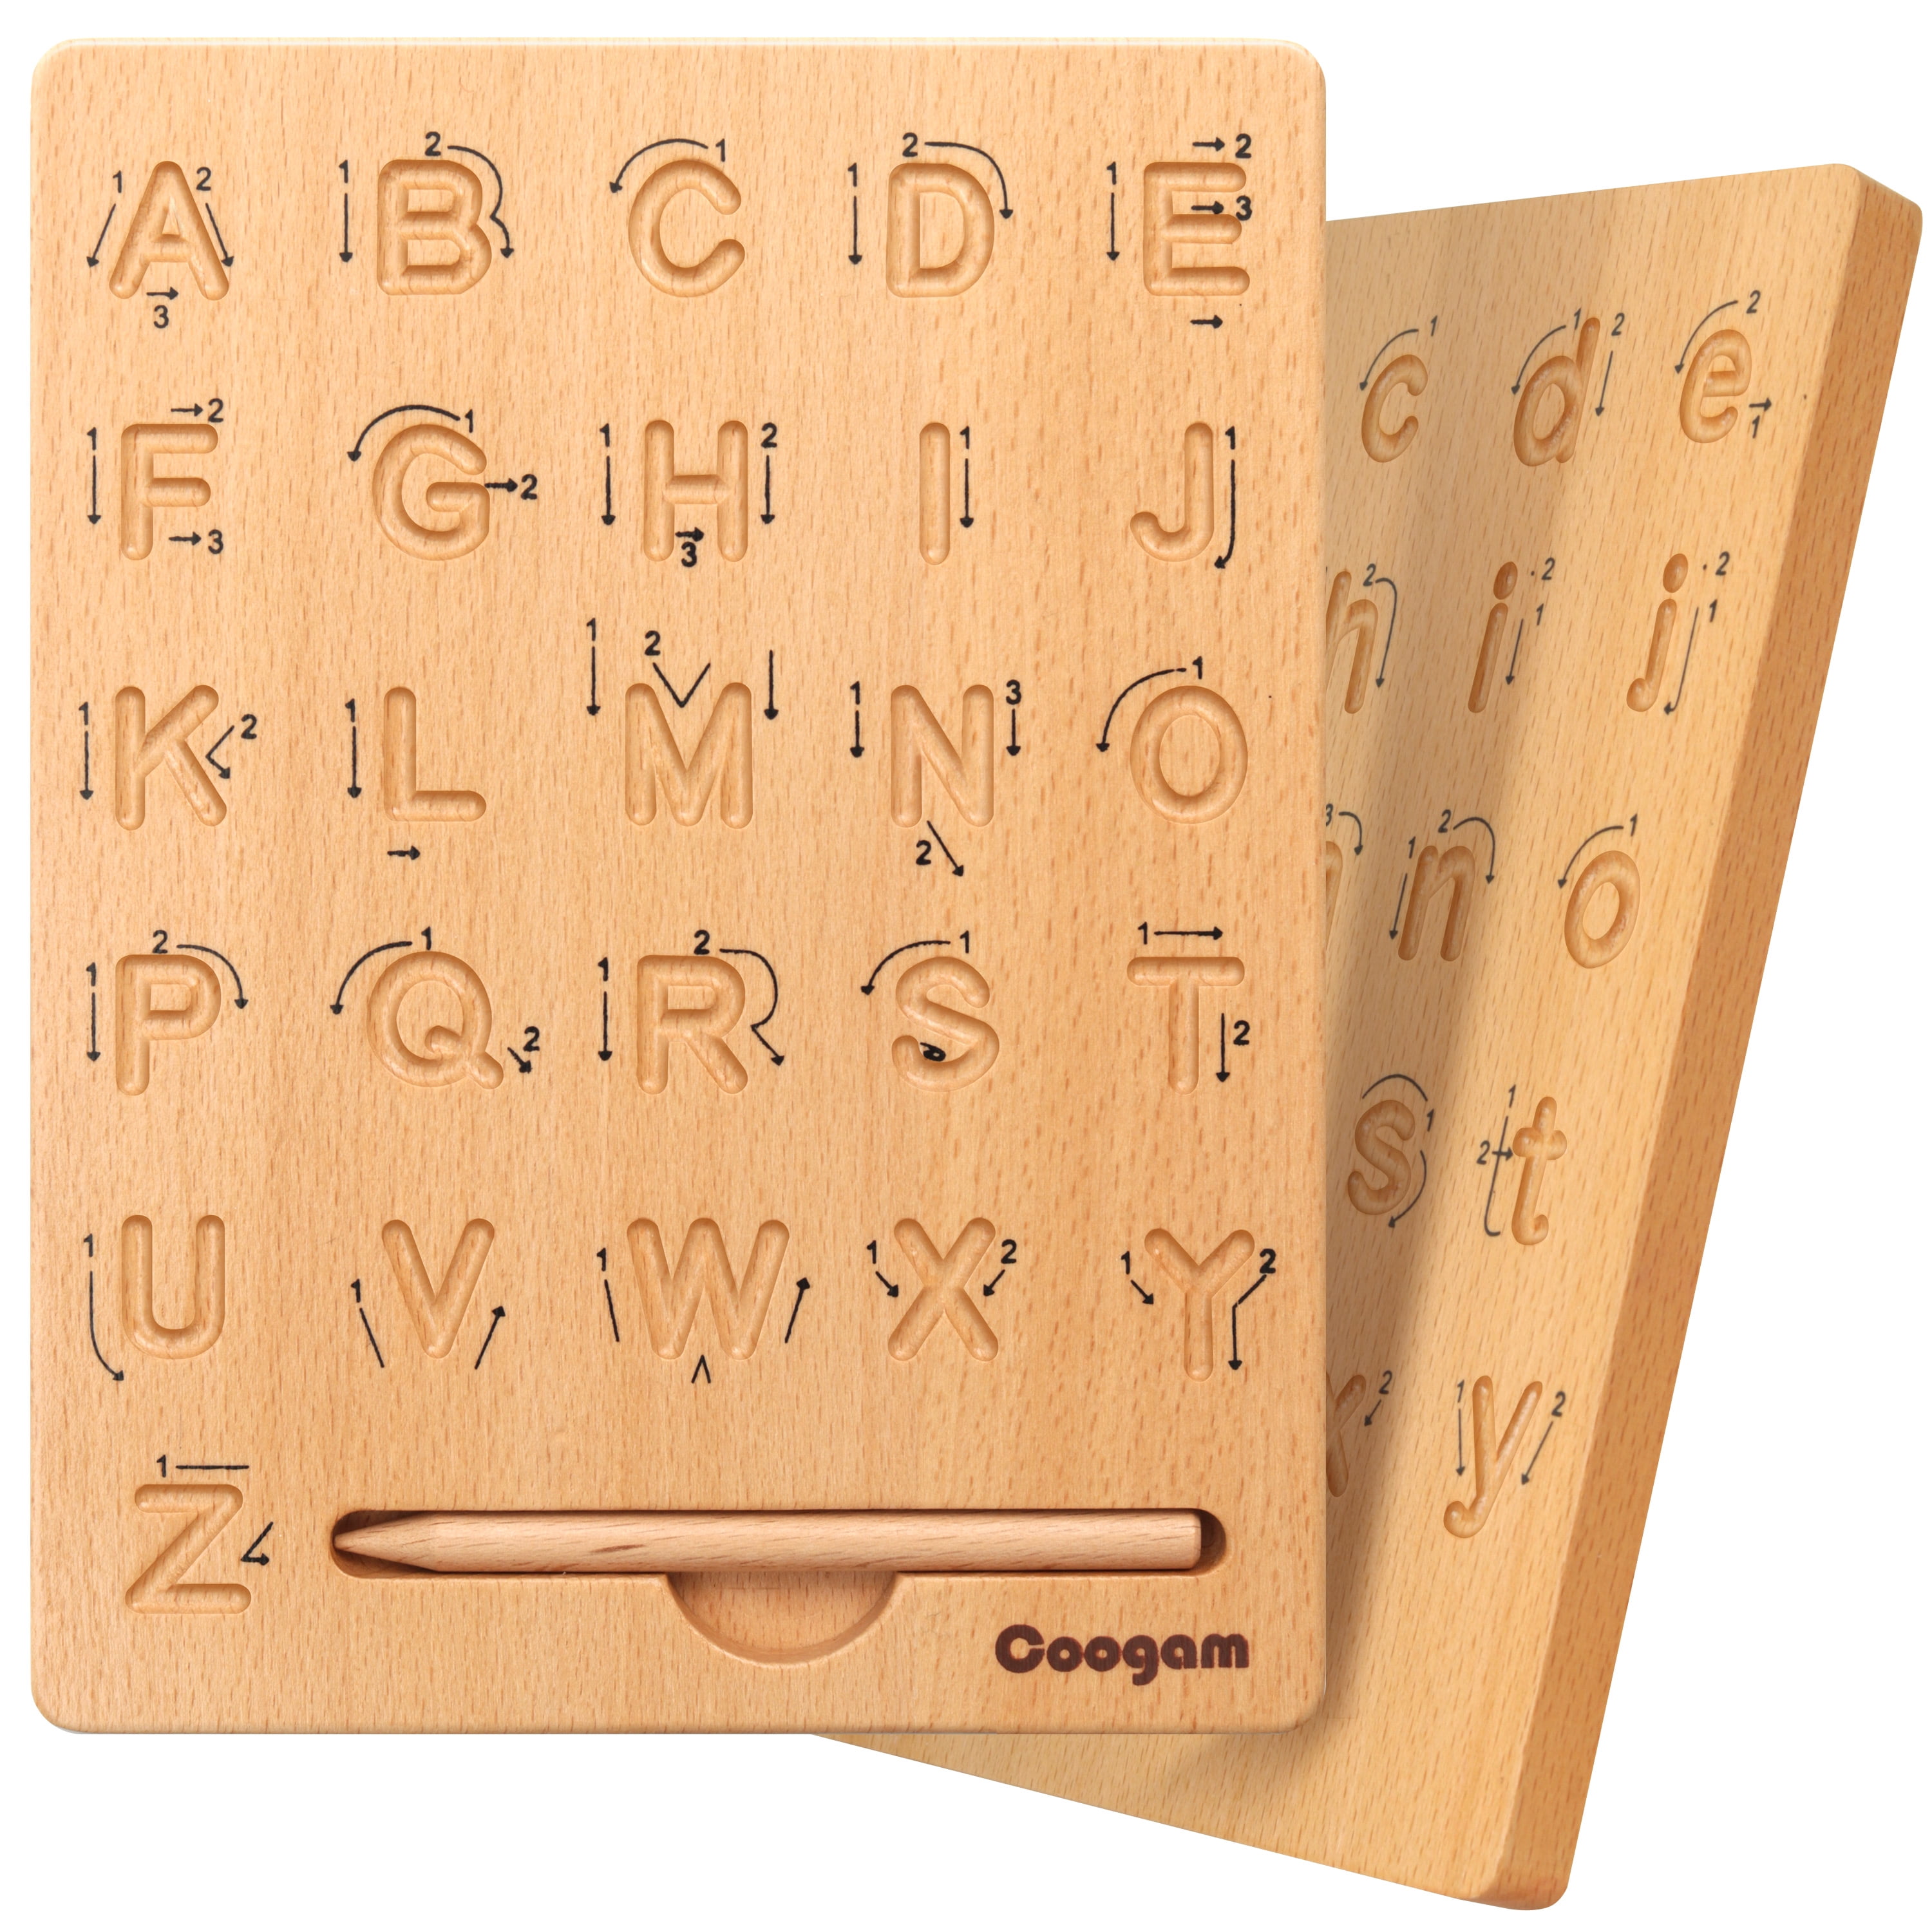 Panda Brothers Wooden Alphabet Tracing Board - Montessori Letters for Learning to Read and Write, Fine Motor Development and Educational Toy for Kids